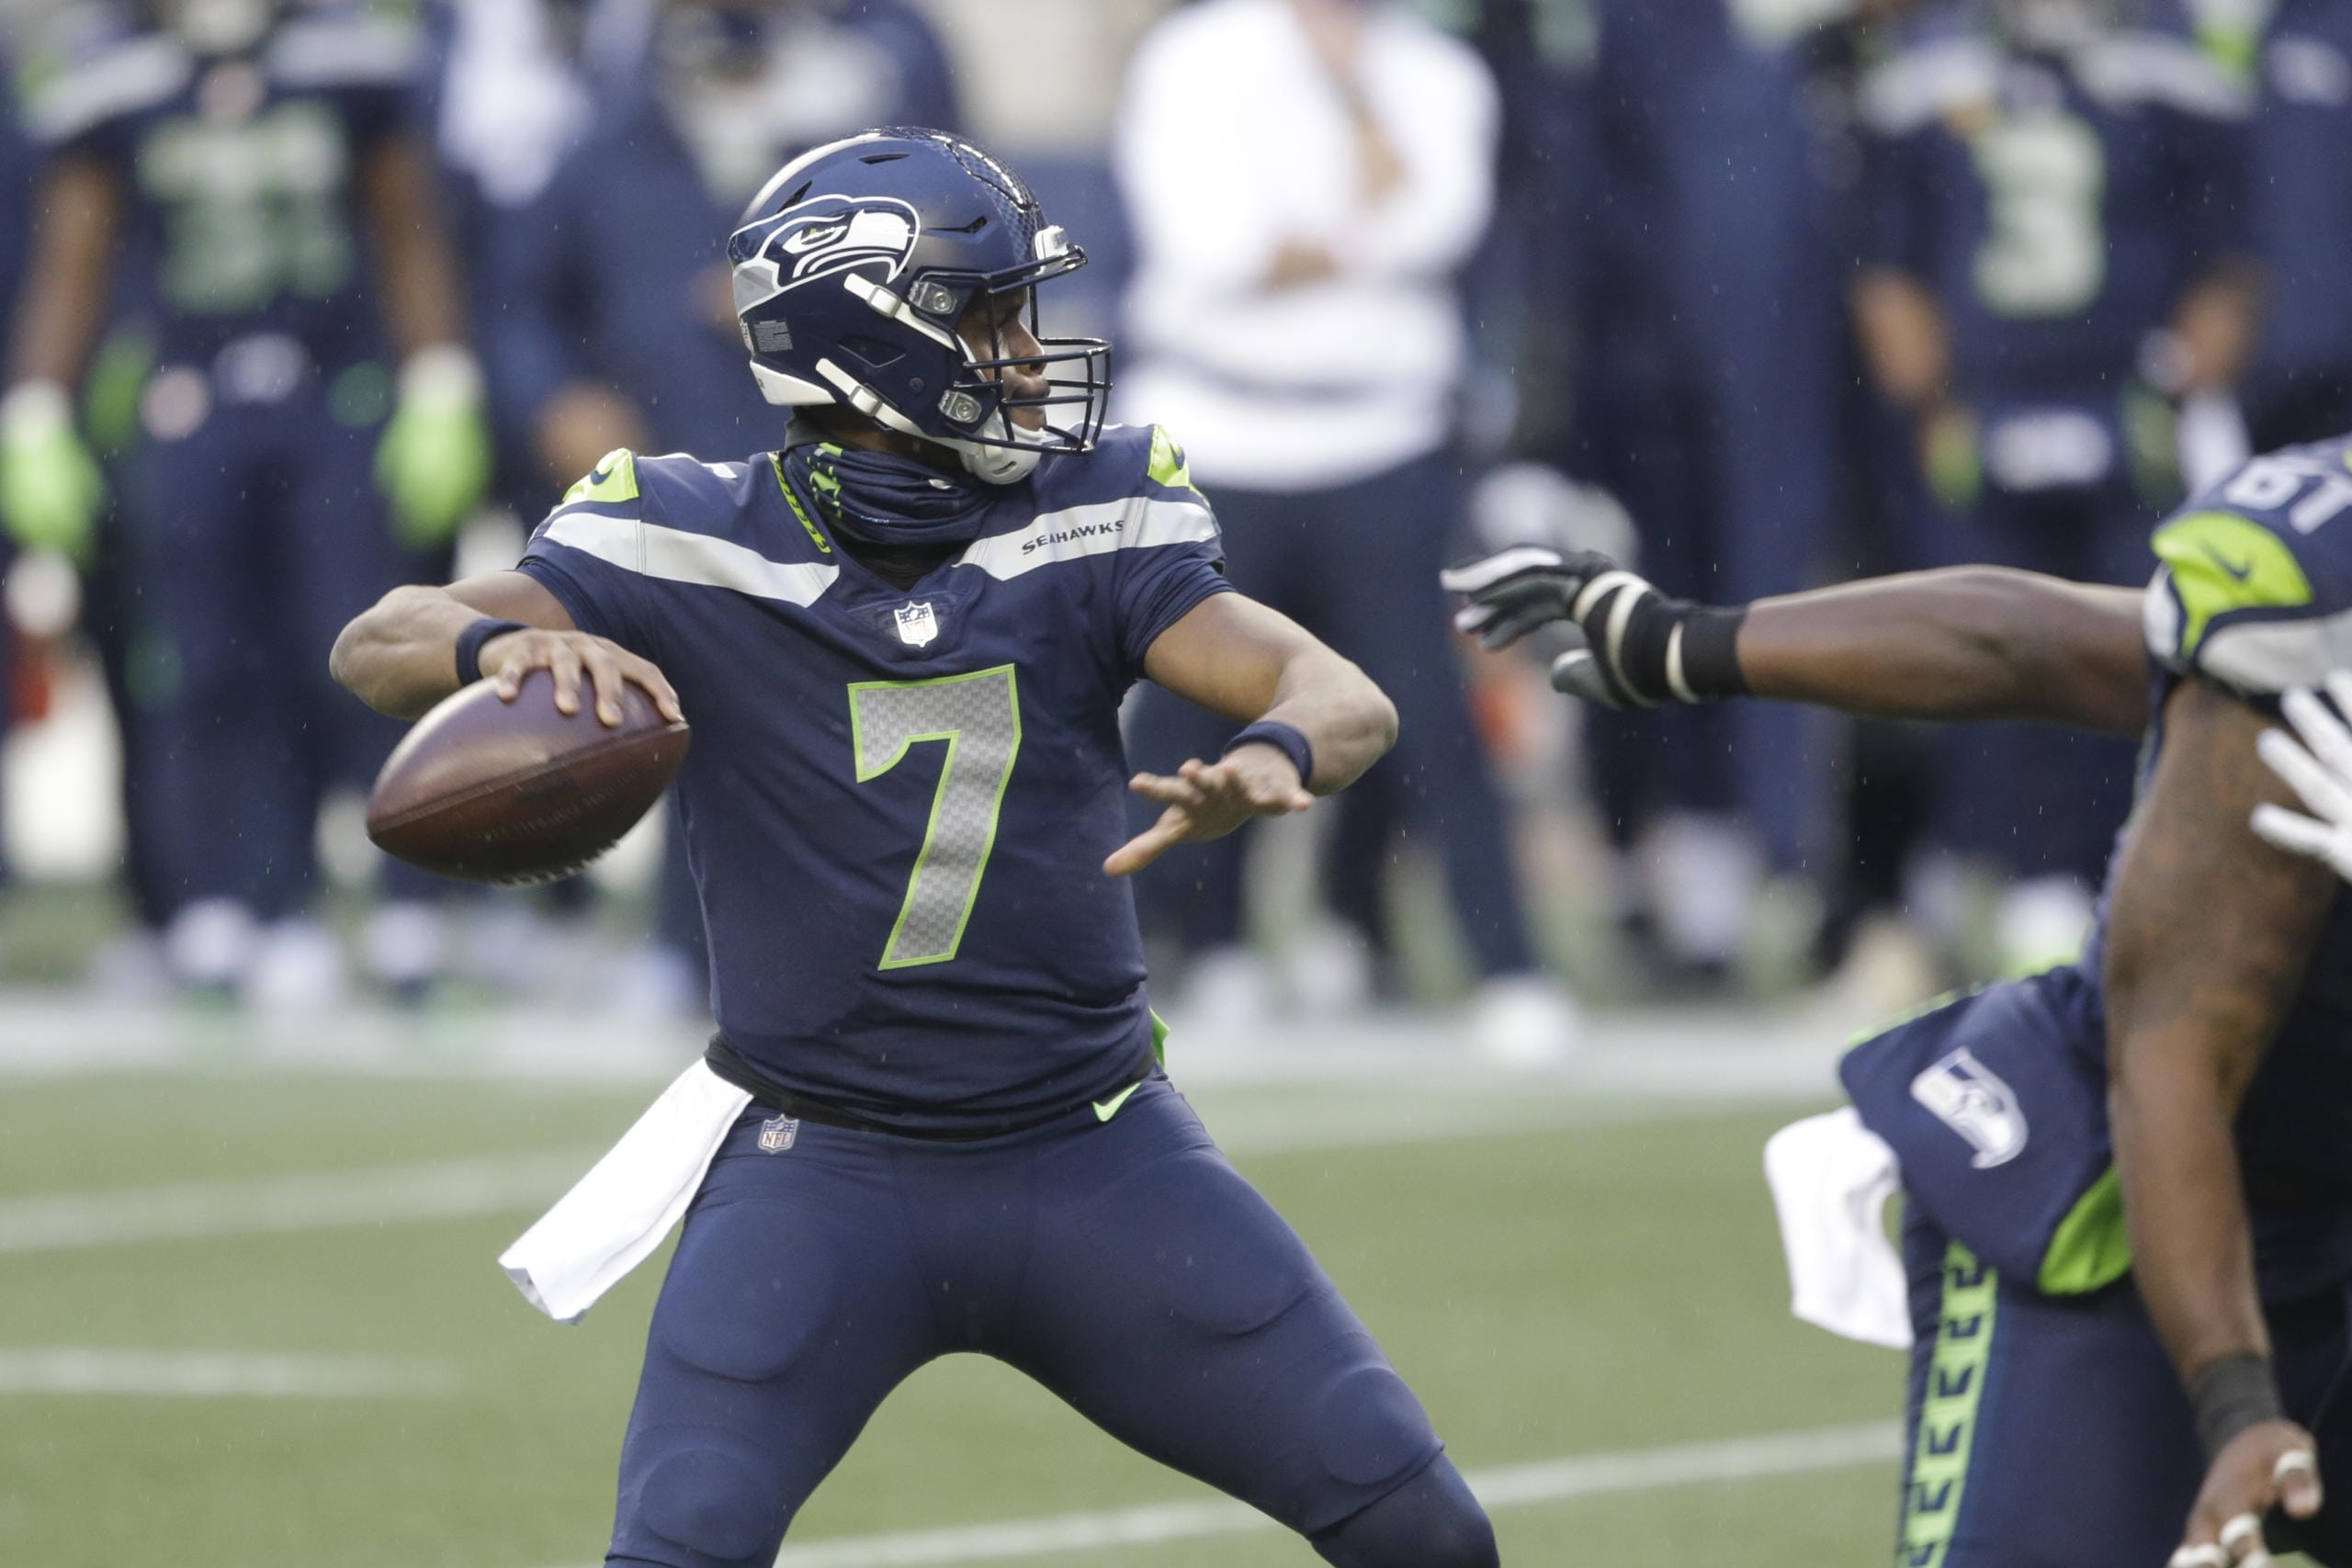 Seattle Seahawks quarterback Geno Smith drops back to pass against the New York Jets during the second half of an NFL football game, Sunday, Dec. 13, 2020, in Seattle.